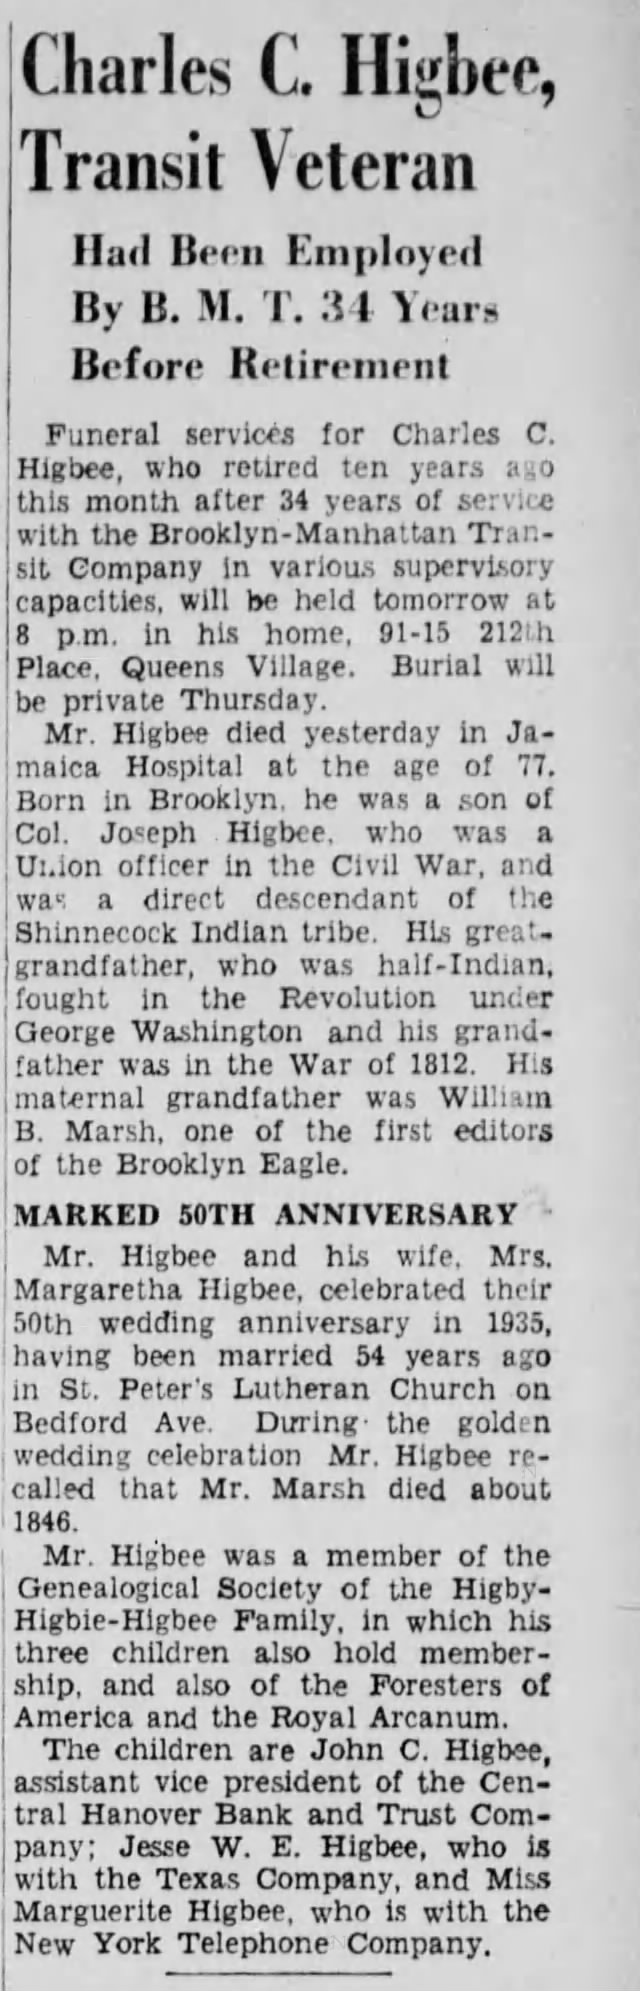 Charles C. Higbee, obituary, The Brooklyn Daily Eagle, 10 October 1939, page 11.